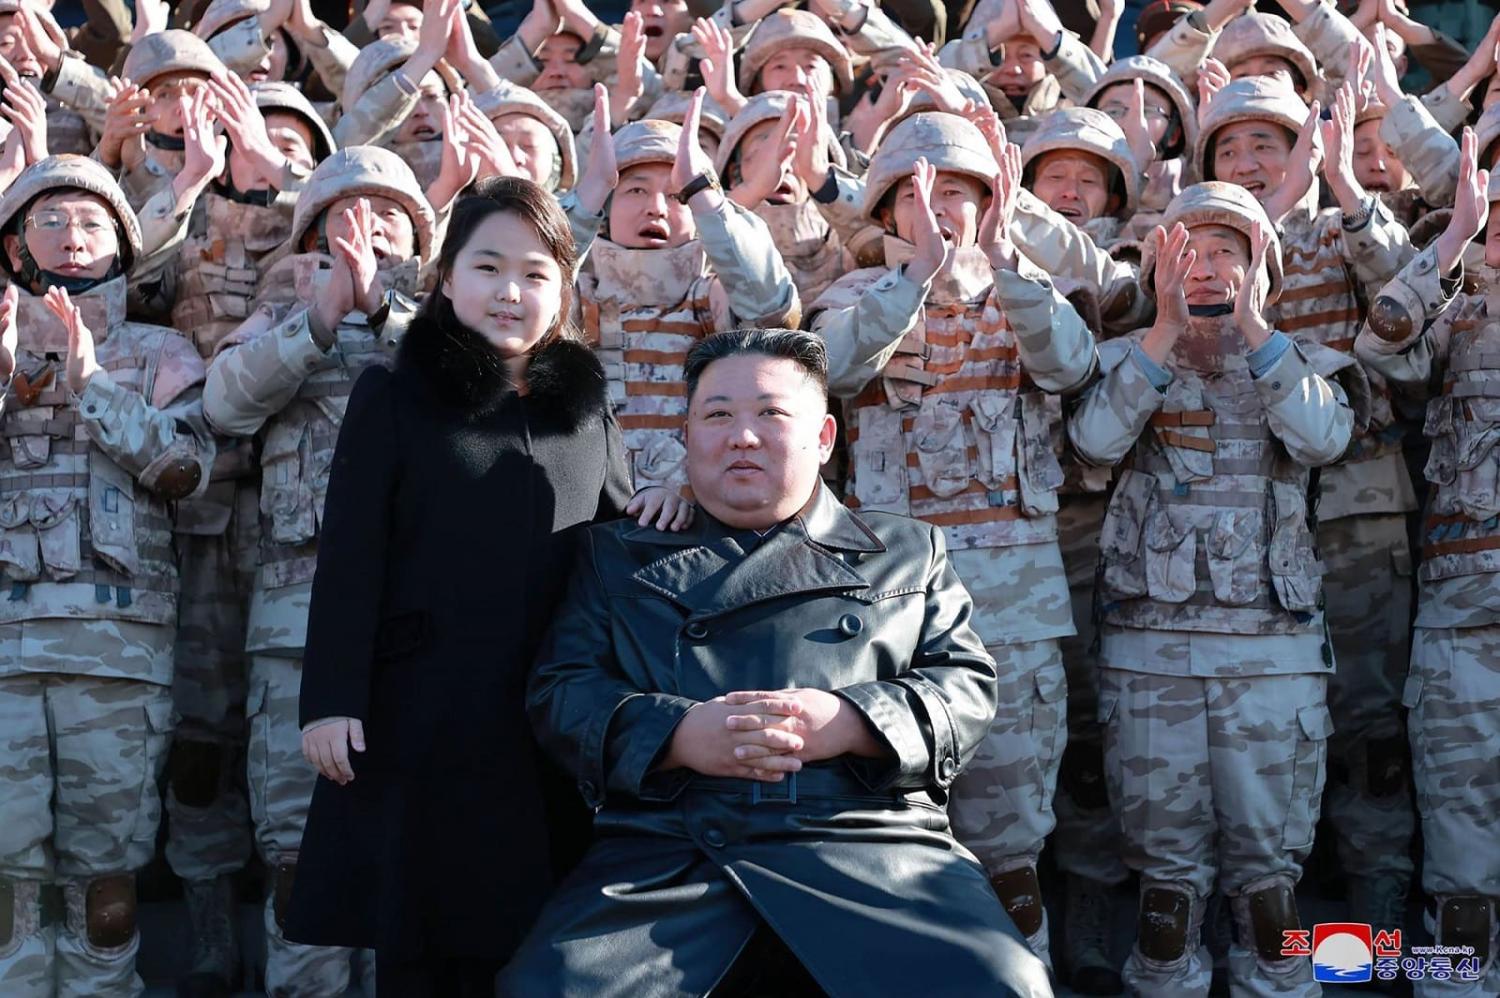 North Korean President Kim Jong-un with daughter Ju-ae (Photo released by North Korean state media KCNA last month)